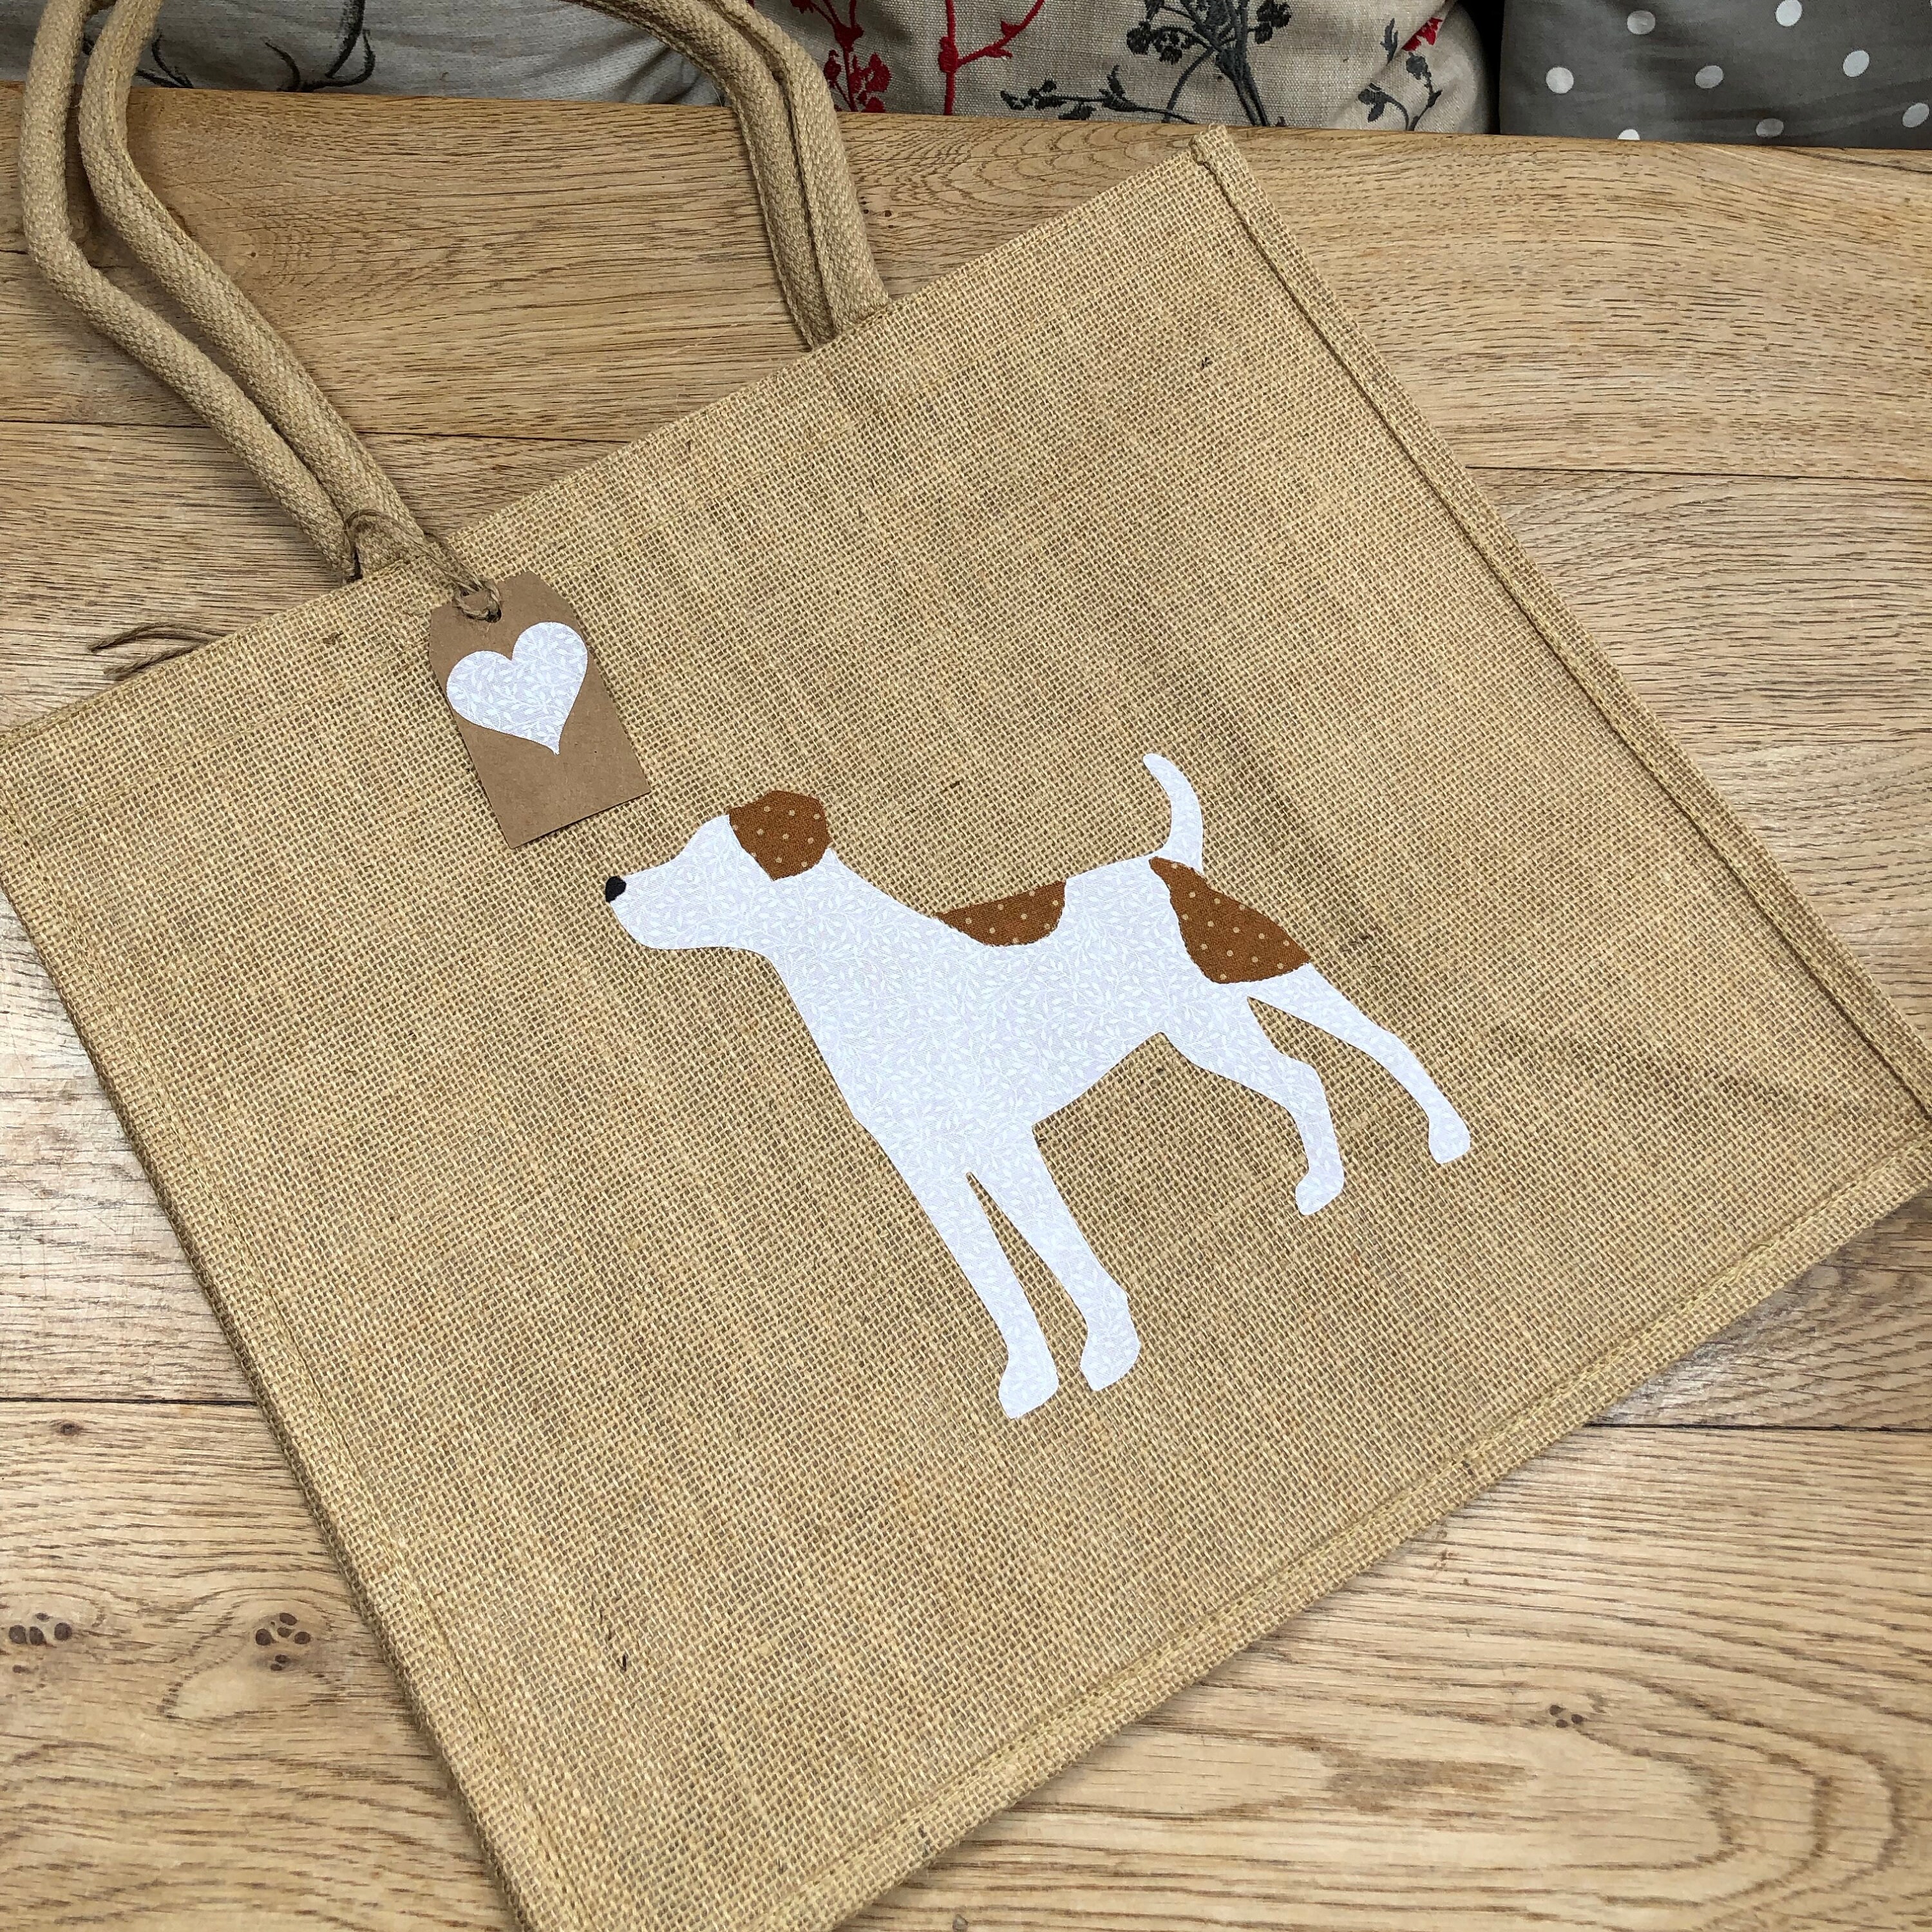 Luxury jute shopping bag featuring a Jack Russell dog design | Etsy